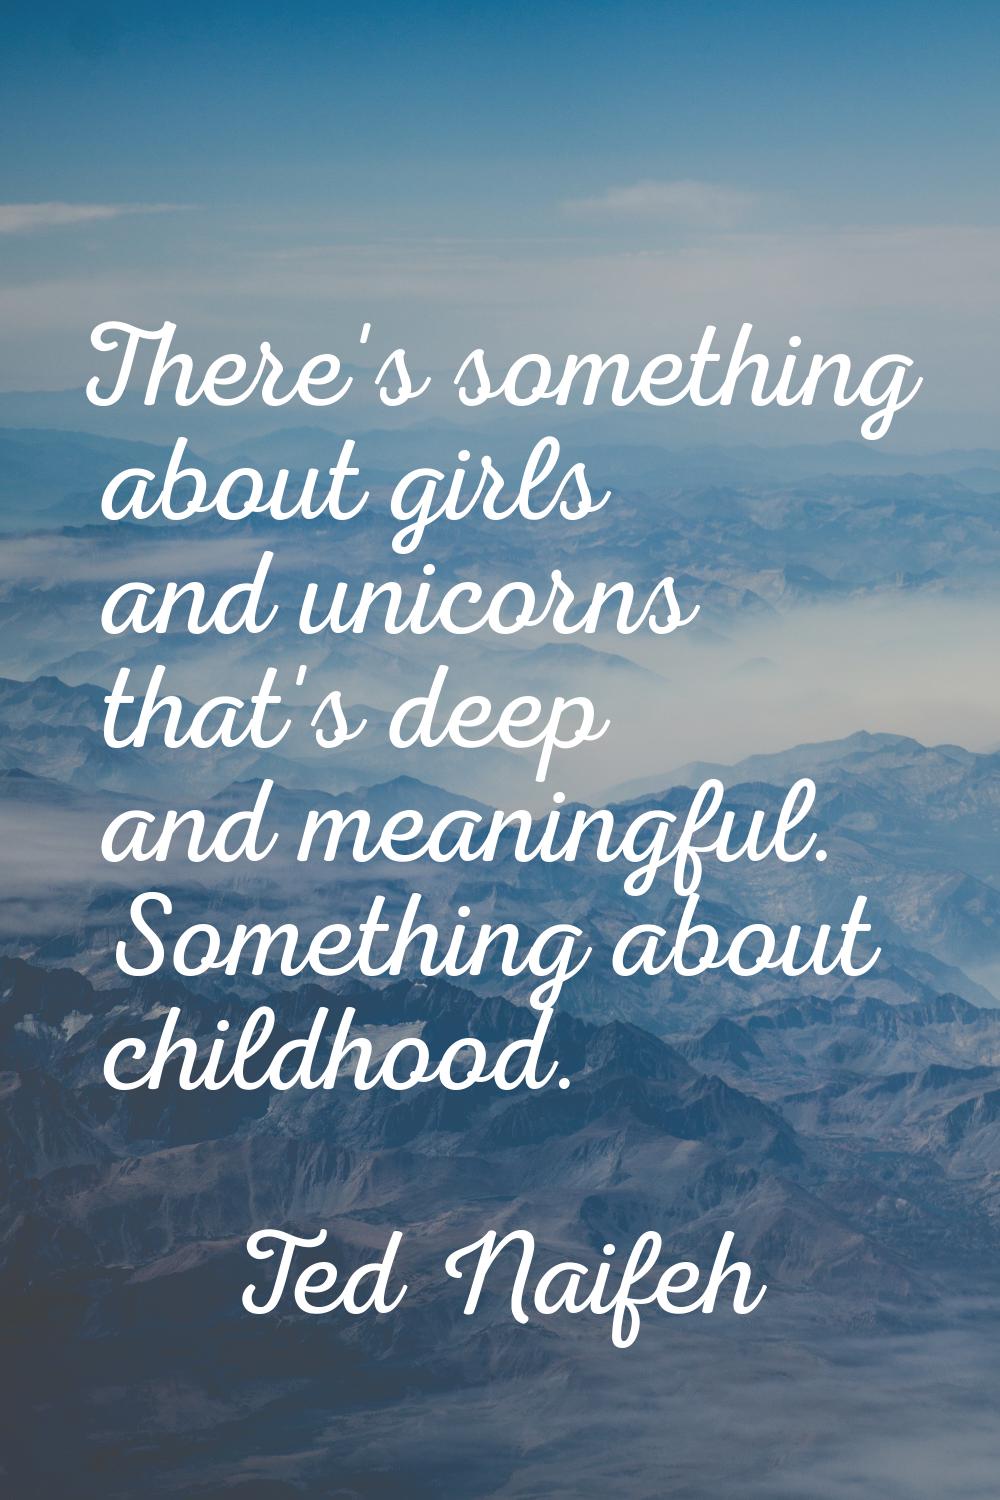 There's something about girls and unicorns that's deep and meaningful. Something about childhood.